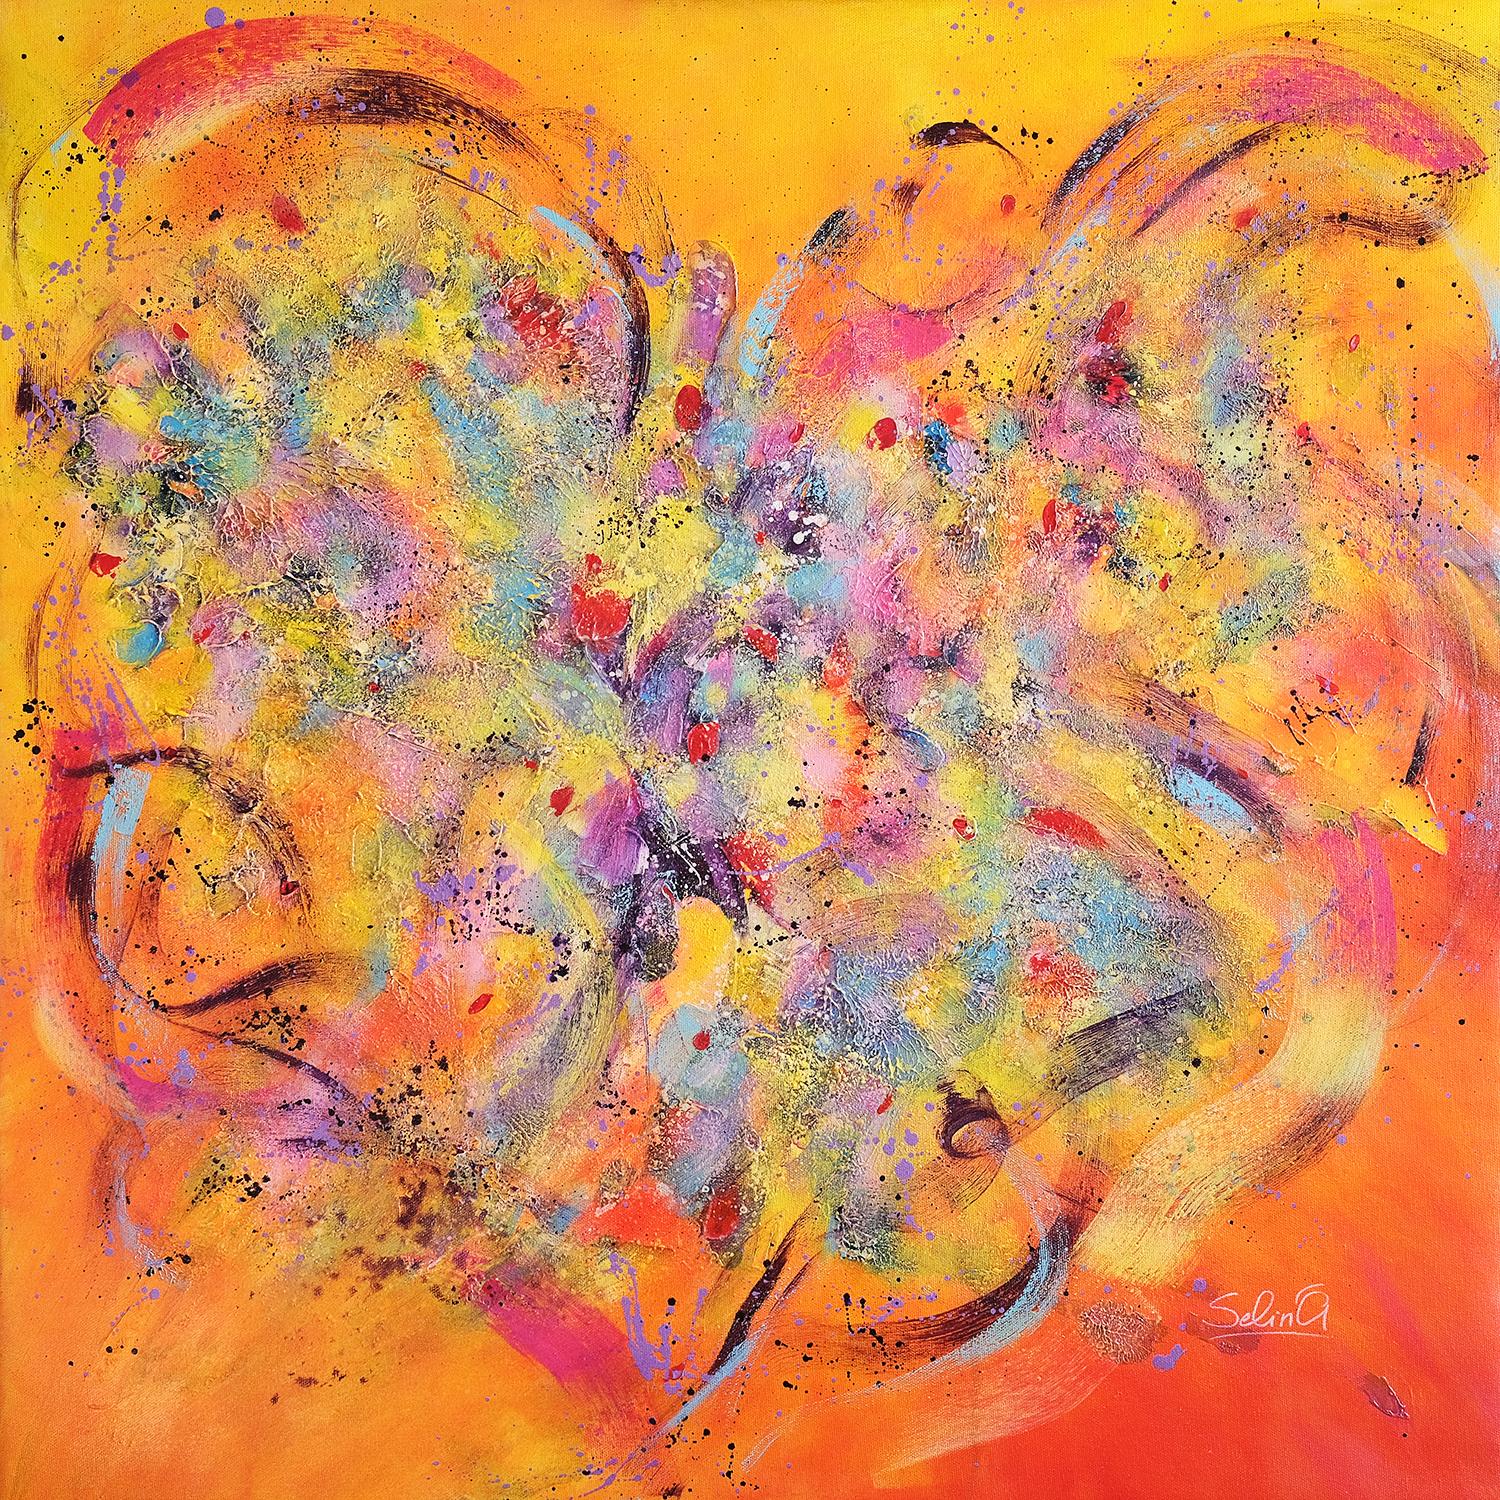 This artwork is about love, my love to colors, to life itself. It's a bit childish and full of miracles, when you feel that everything is possible.The main color here is orange- color of happiness, joy, life energy. 
Bright colors bring bright